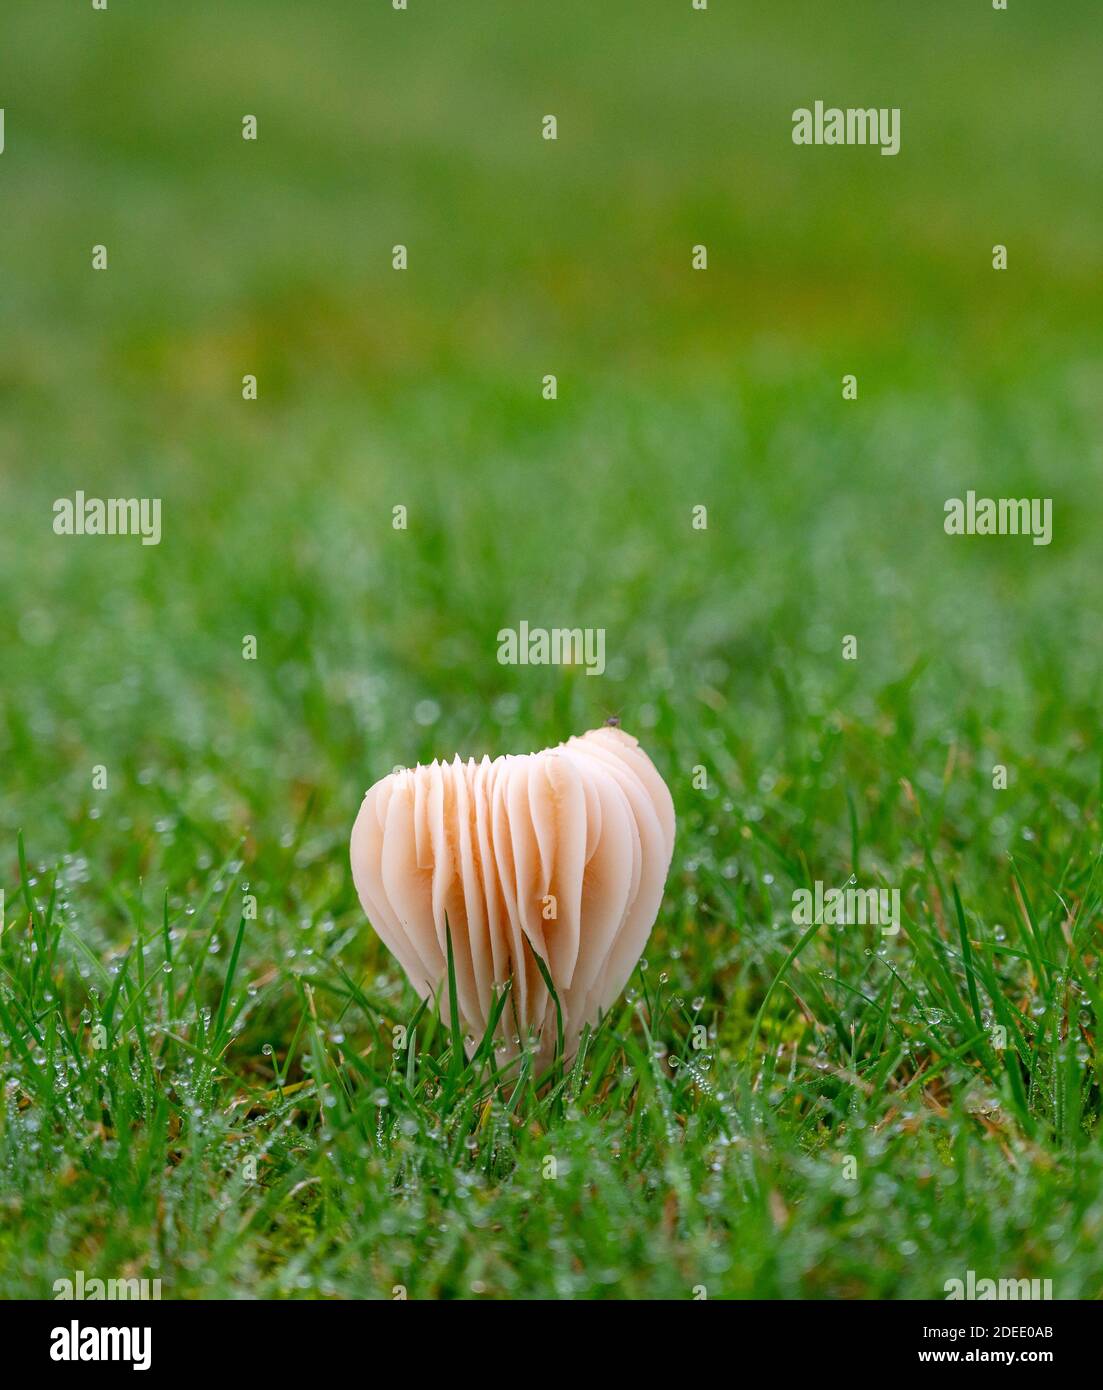 Possibly Snowy Waxcap - Hygrocybe virginea mushroom fungi growing in a garden with Autumn dew on the grass  Photograph taken by Simon Dack Stock Photo